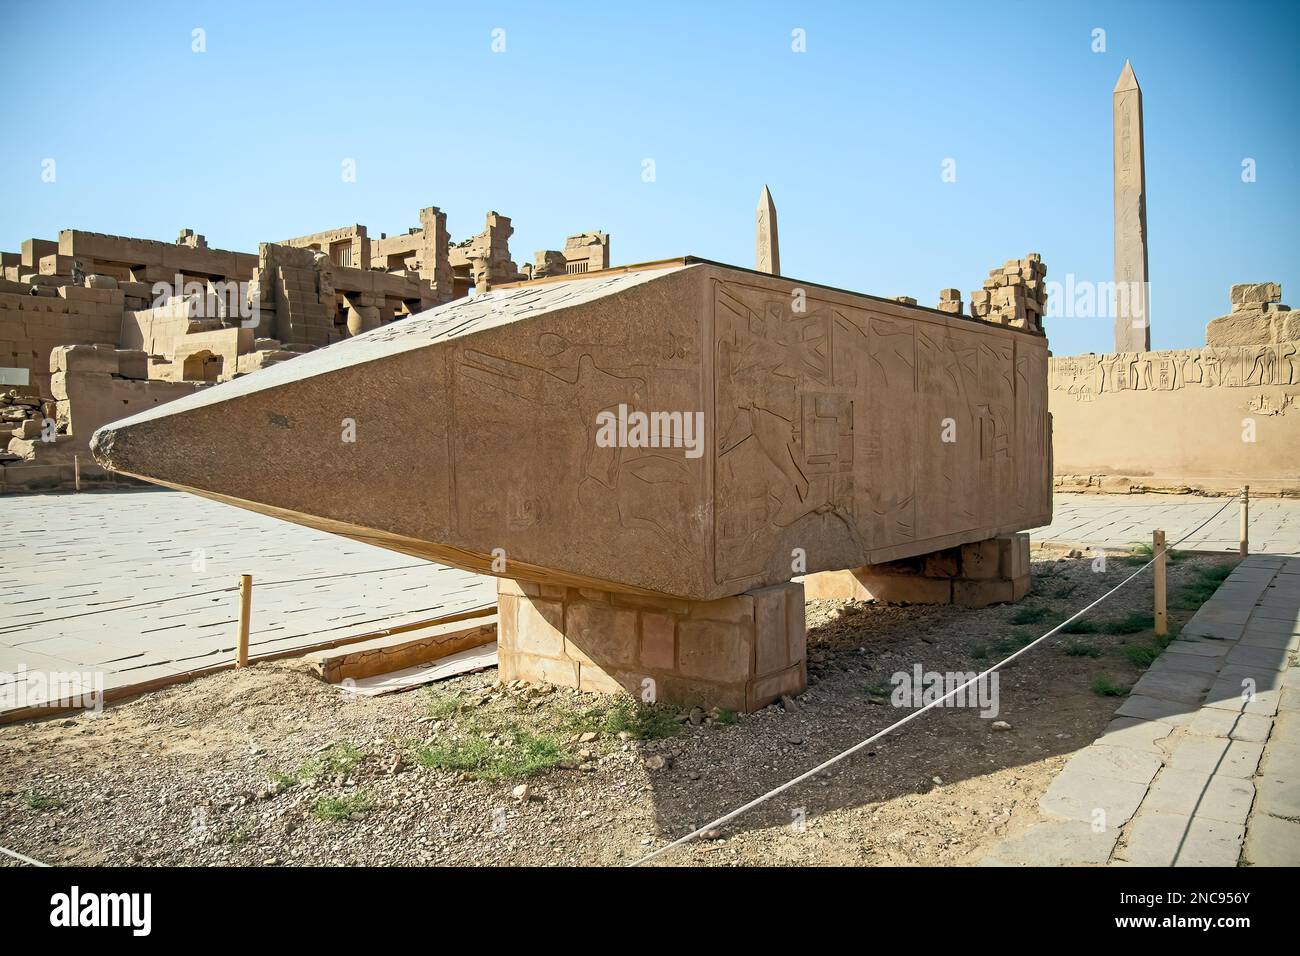 Luxor, Egypt. The Karnak Temple Complex, commonly known as Karnak, comprises a vast mix of decayed temples. 26th March 2013. Stock Photo